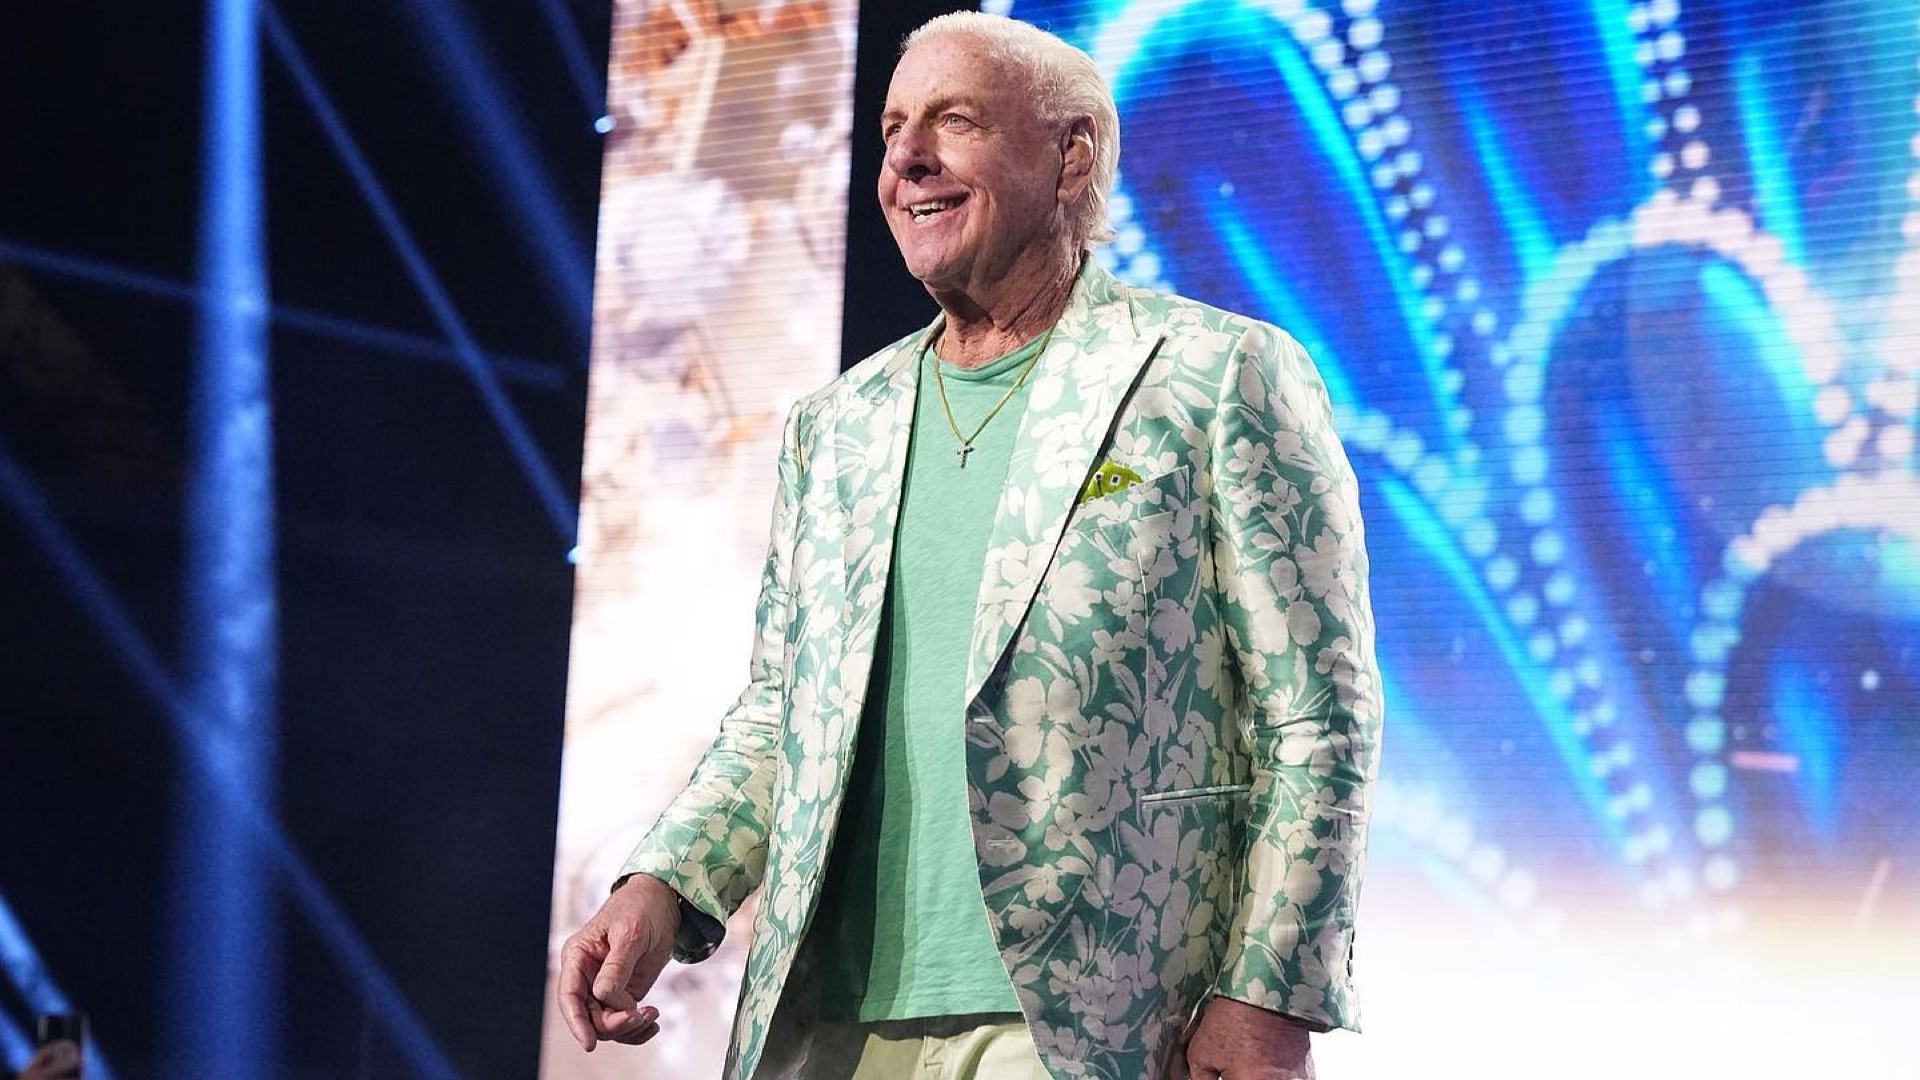 Ric Flair heads to the ring on AEW Dynamite